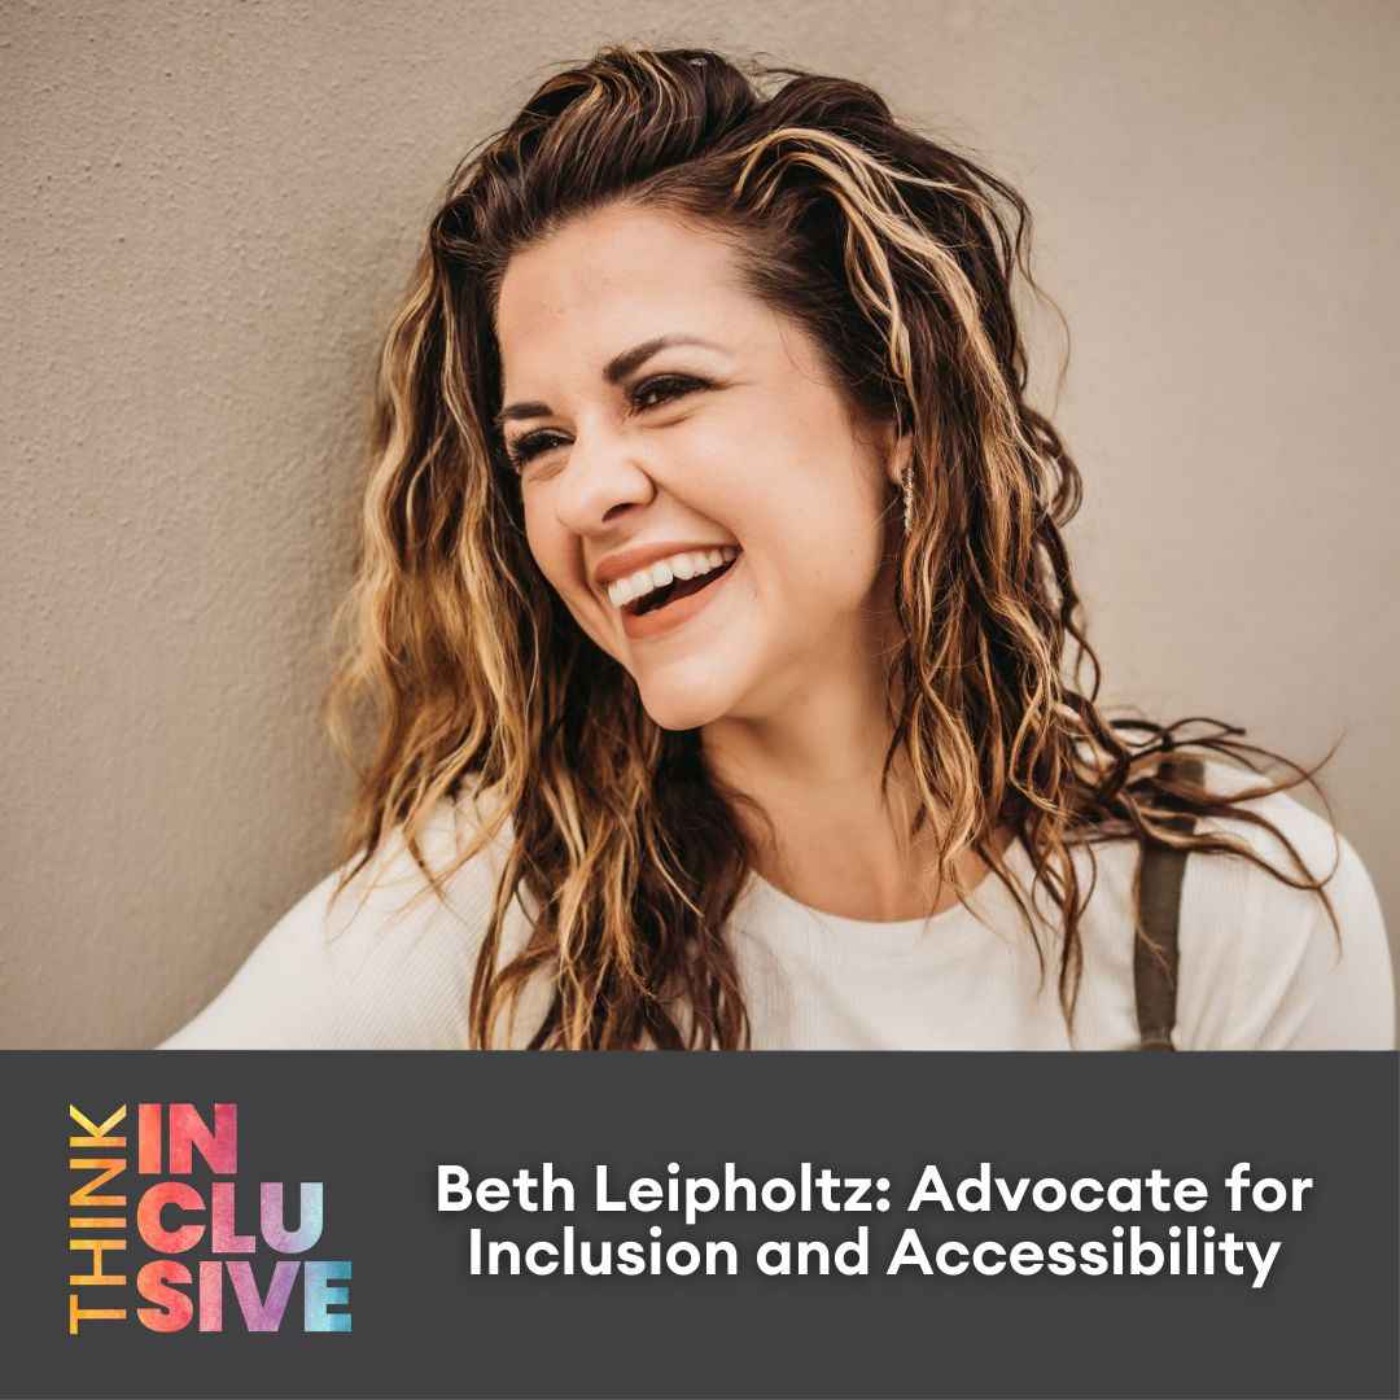 Beth Leipholtz: Advocate for Inclusion and Accessibility